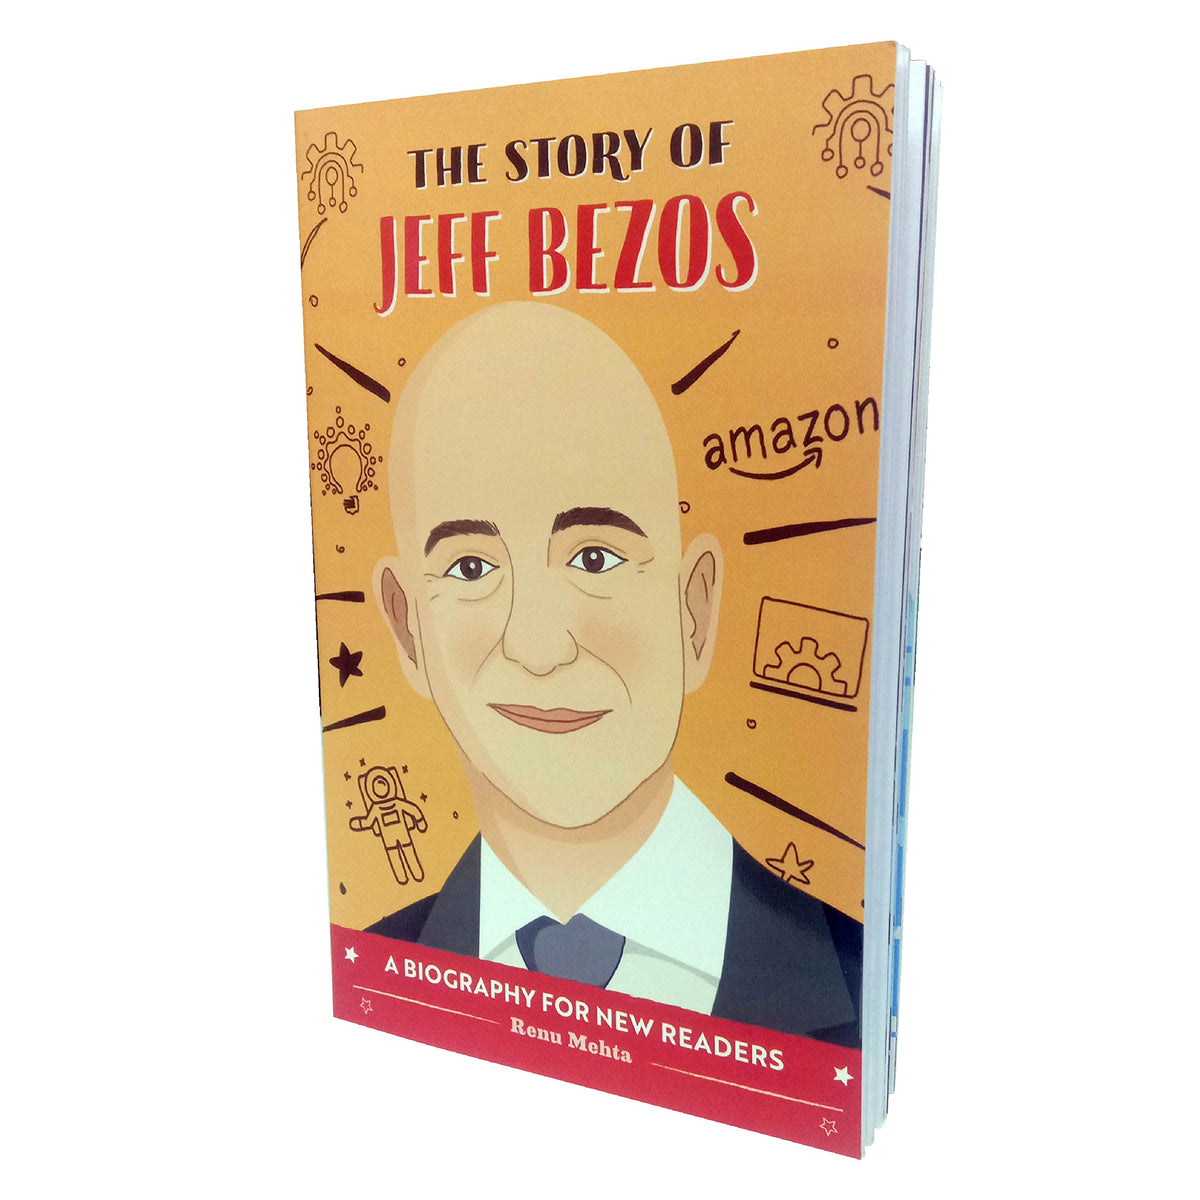 The Story of Jeff Bezos-Biography Inspiring Stories Book for Kids Children